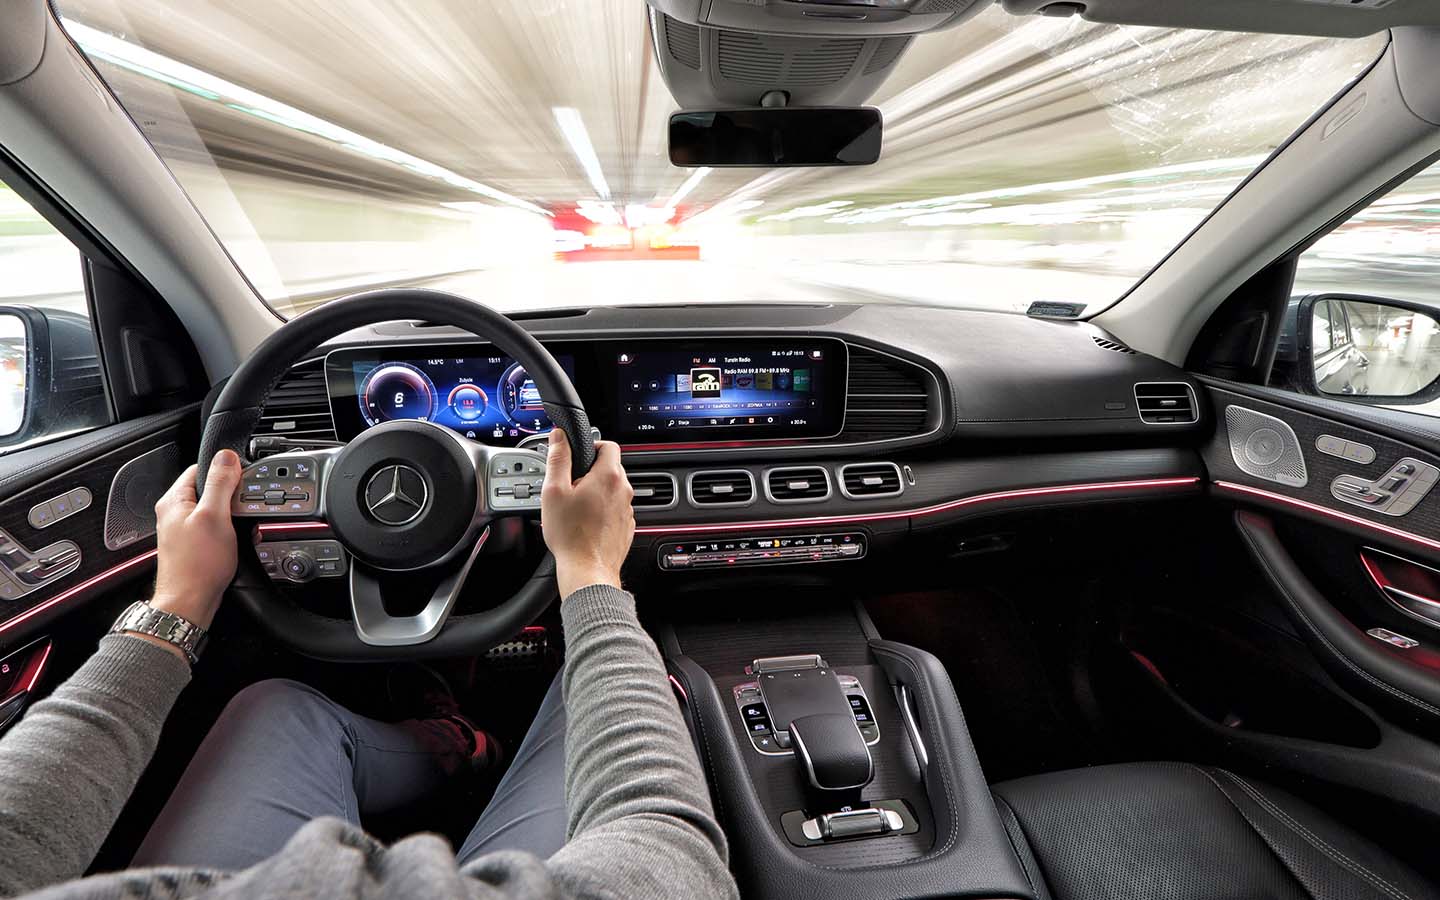 Mercedes Active Distance Assist Distronic may not work properly during bad weather conditions